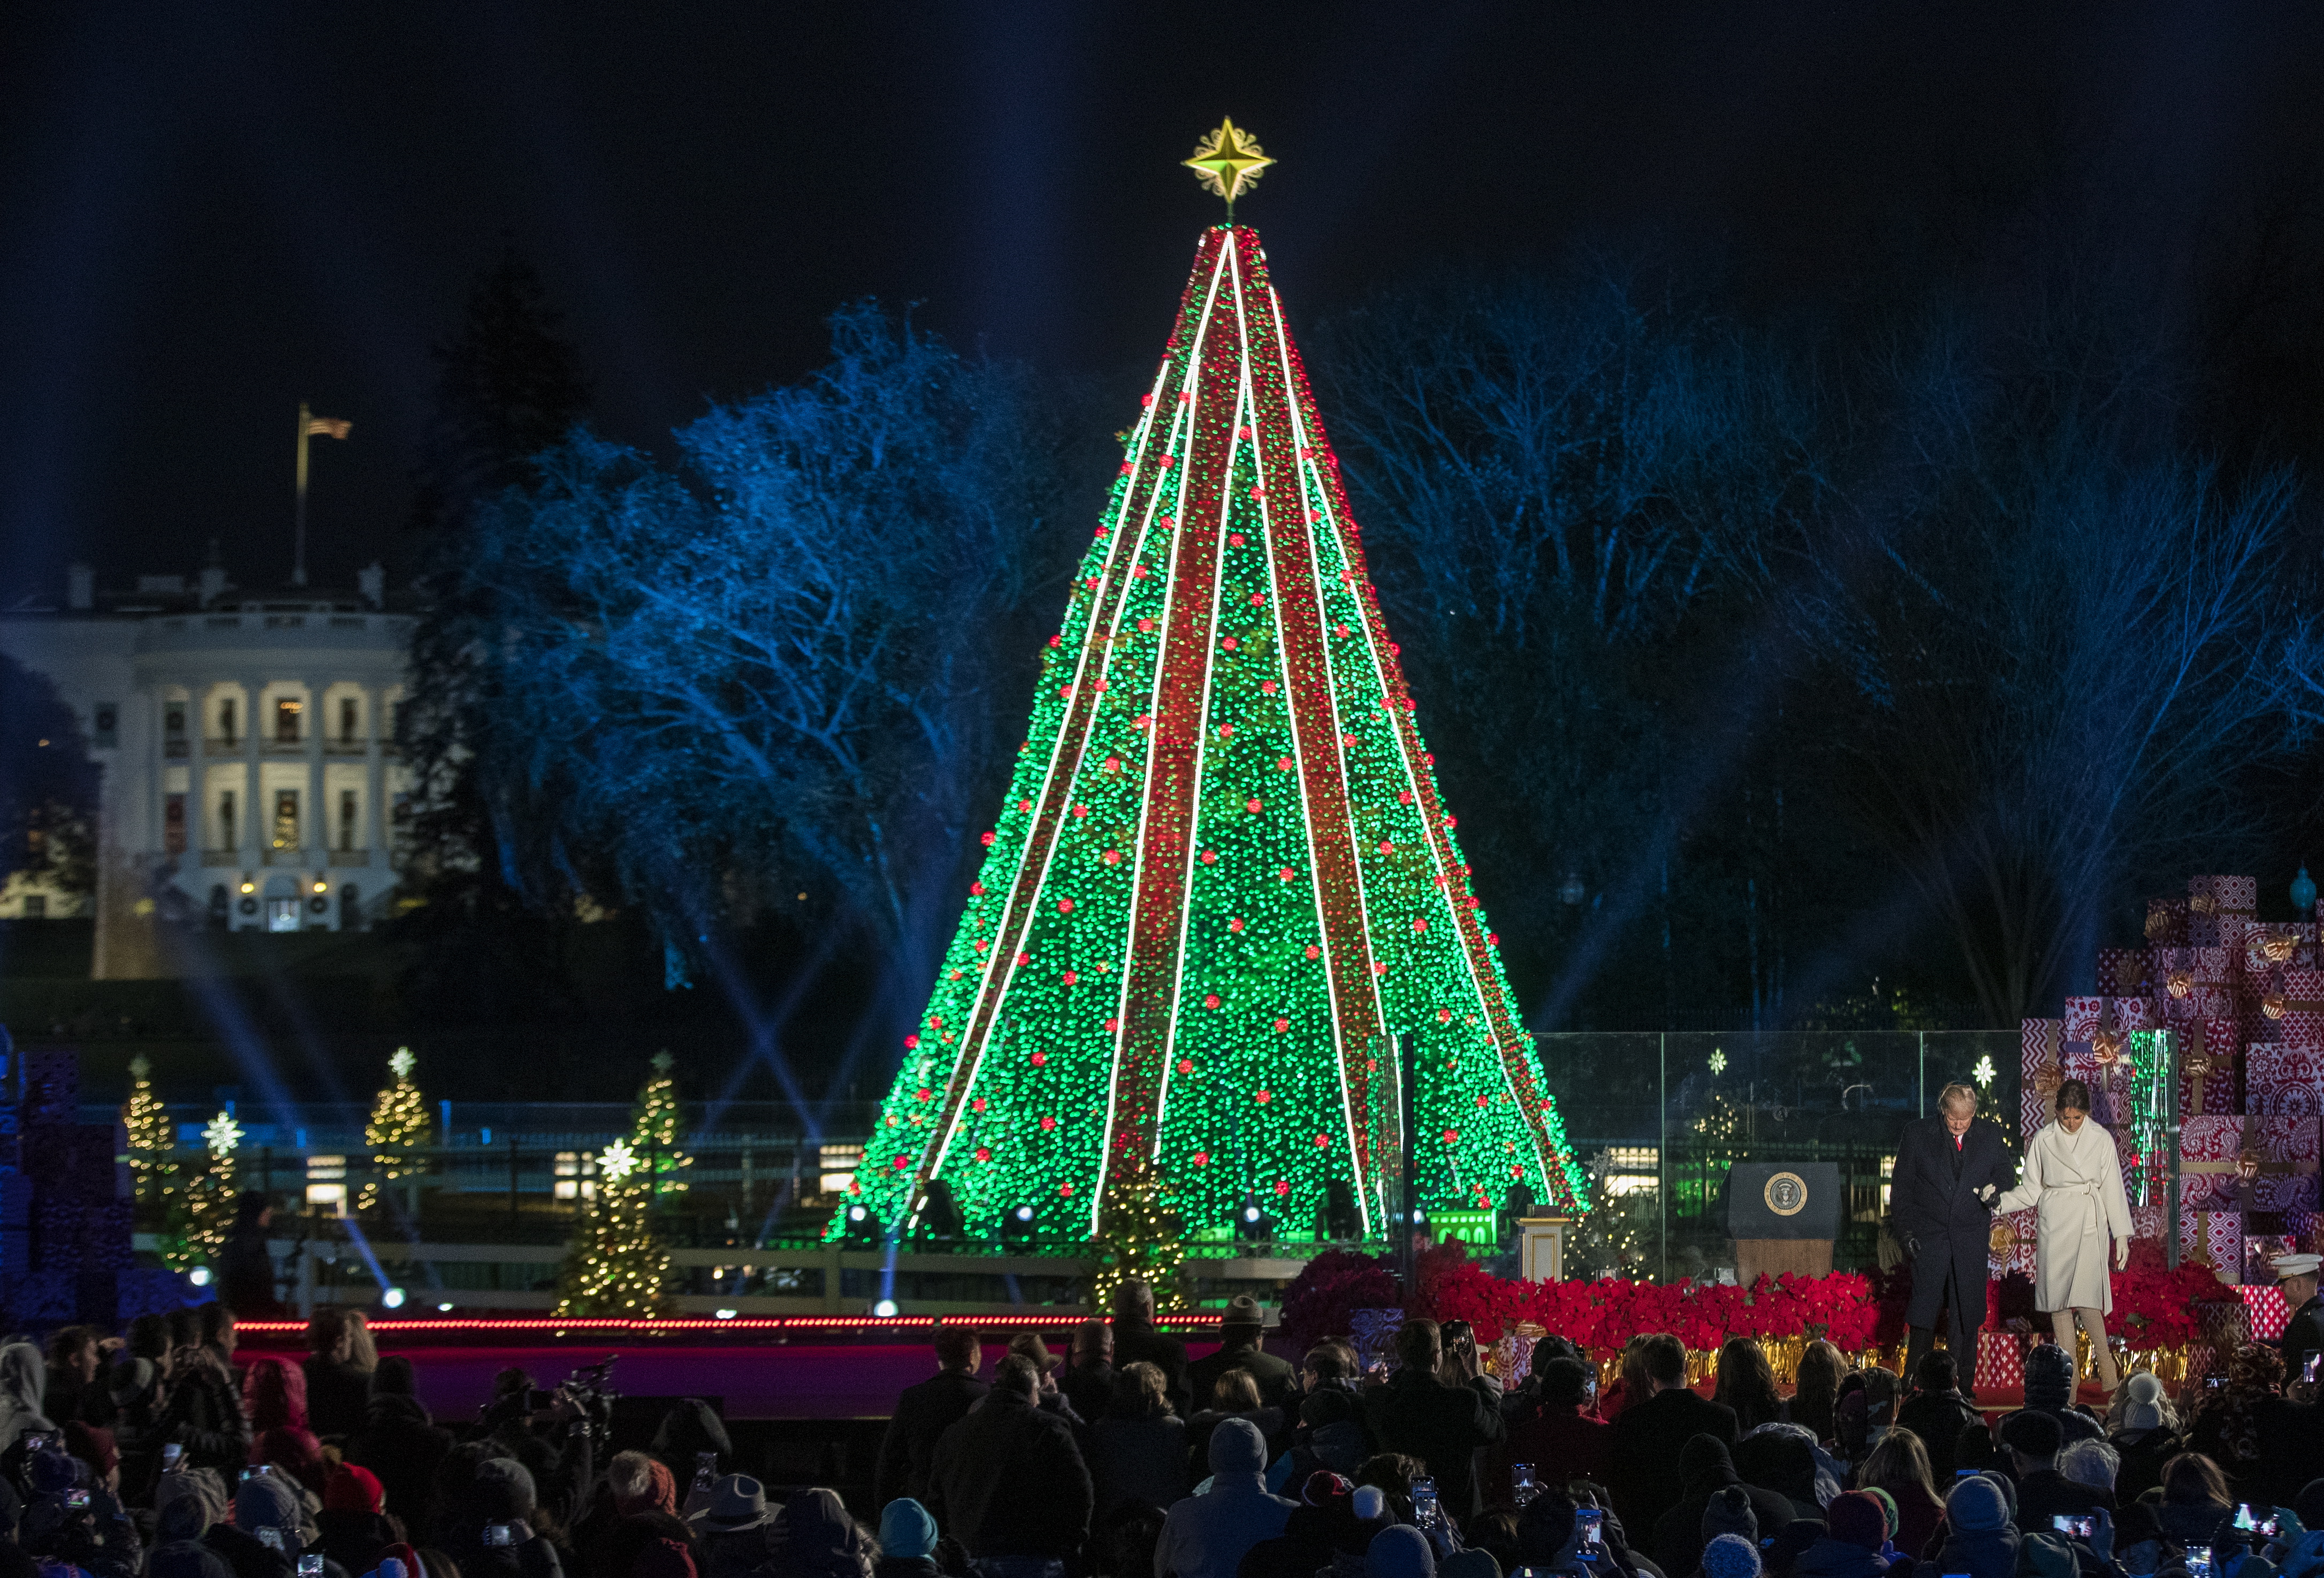 epa07196430 US President Donald J. Trump (2nd R) and First Lady Melania Trump (R) participate in the 2018 National Christmas Tree Lighting at The Ellipse in President's Park south of the White House in Washington, DC, USA, 28 November 2018. This is the 96th annual lighting ceremony.  EPA/ERIK S. LESSER